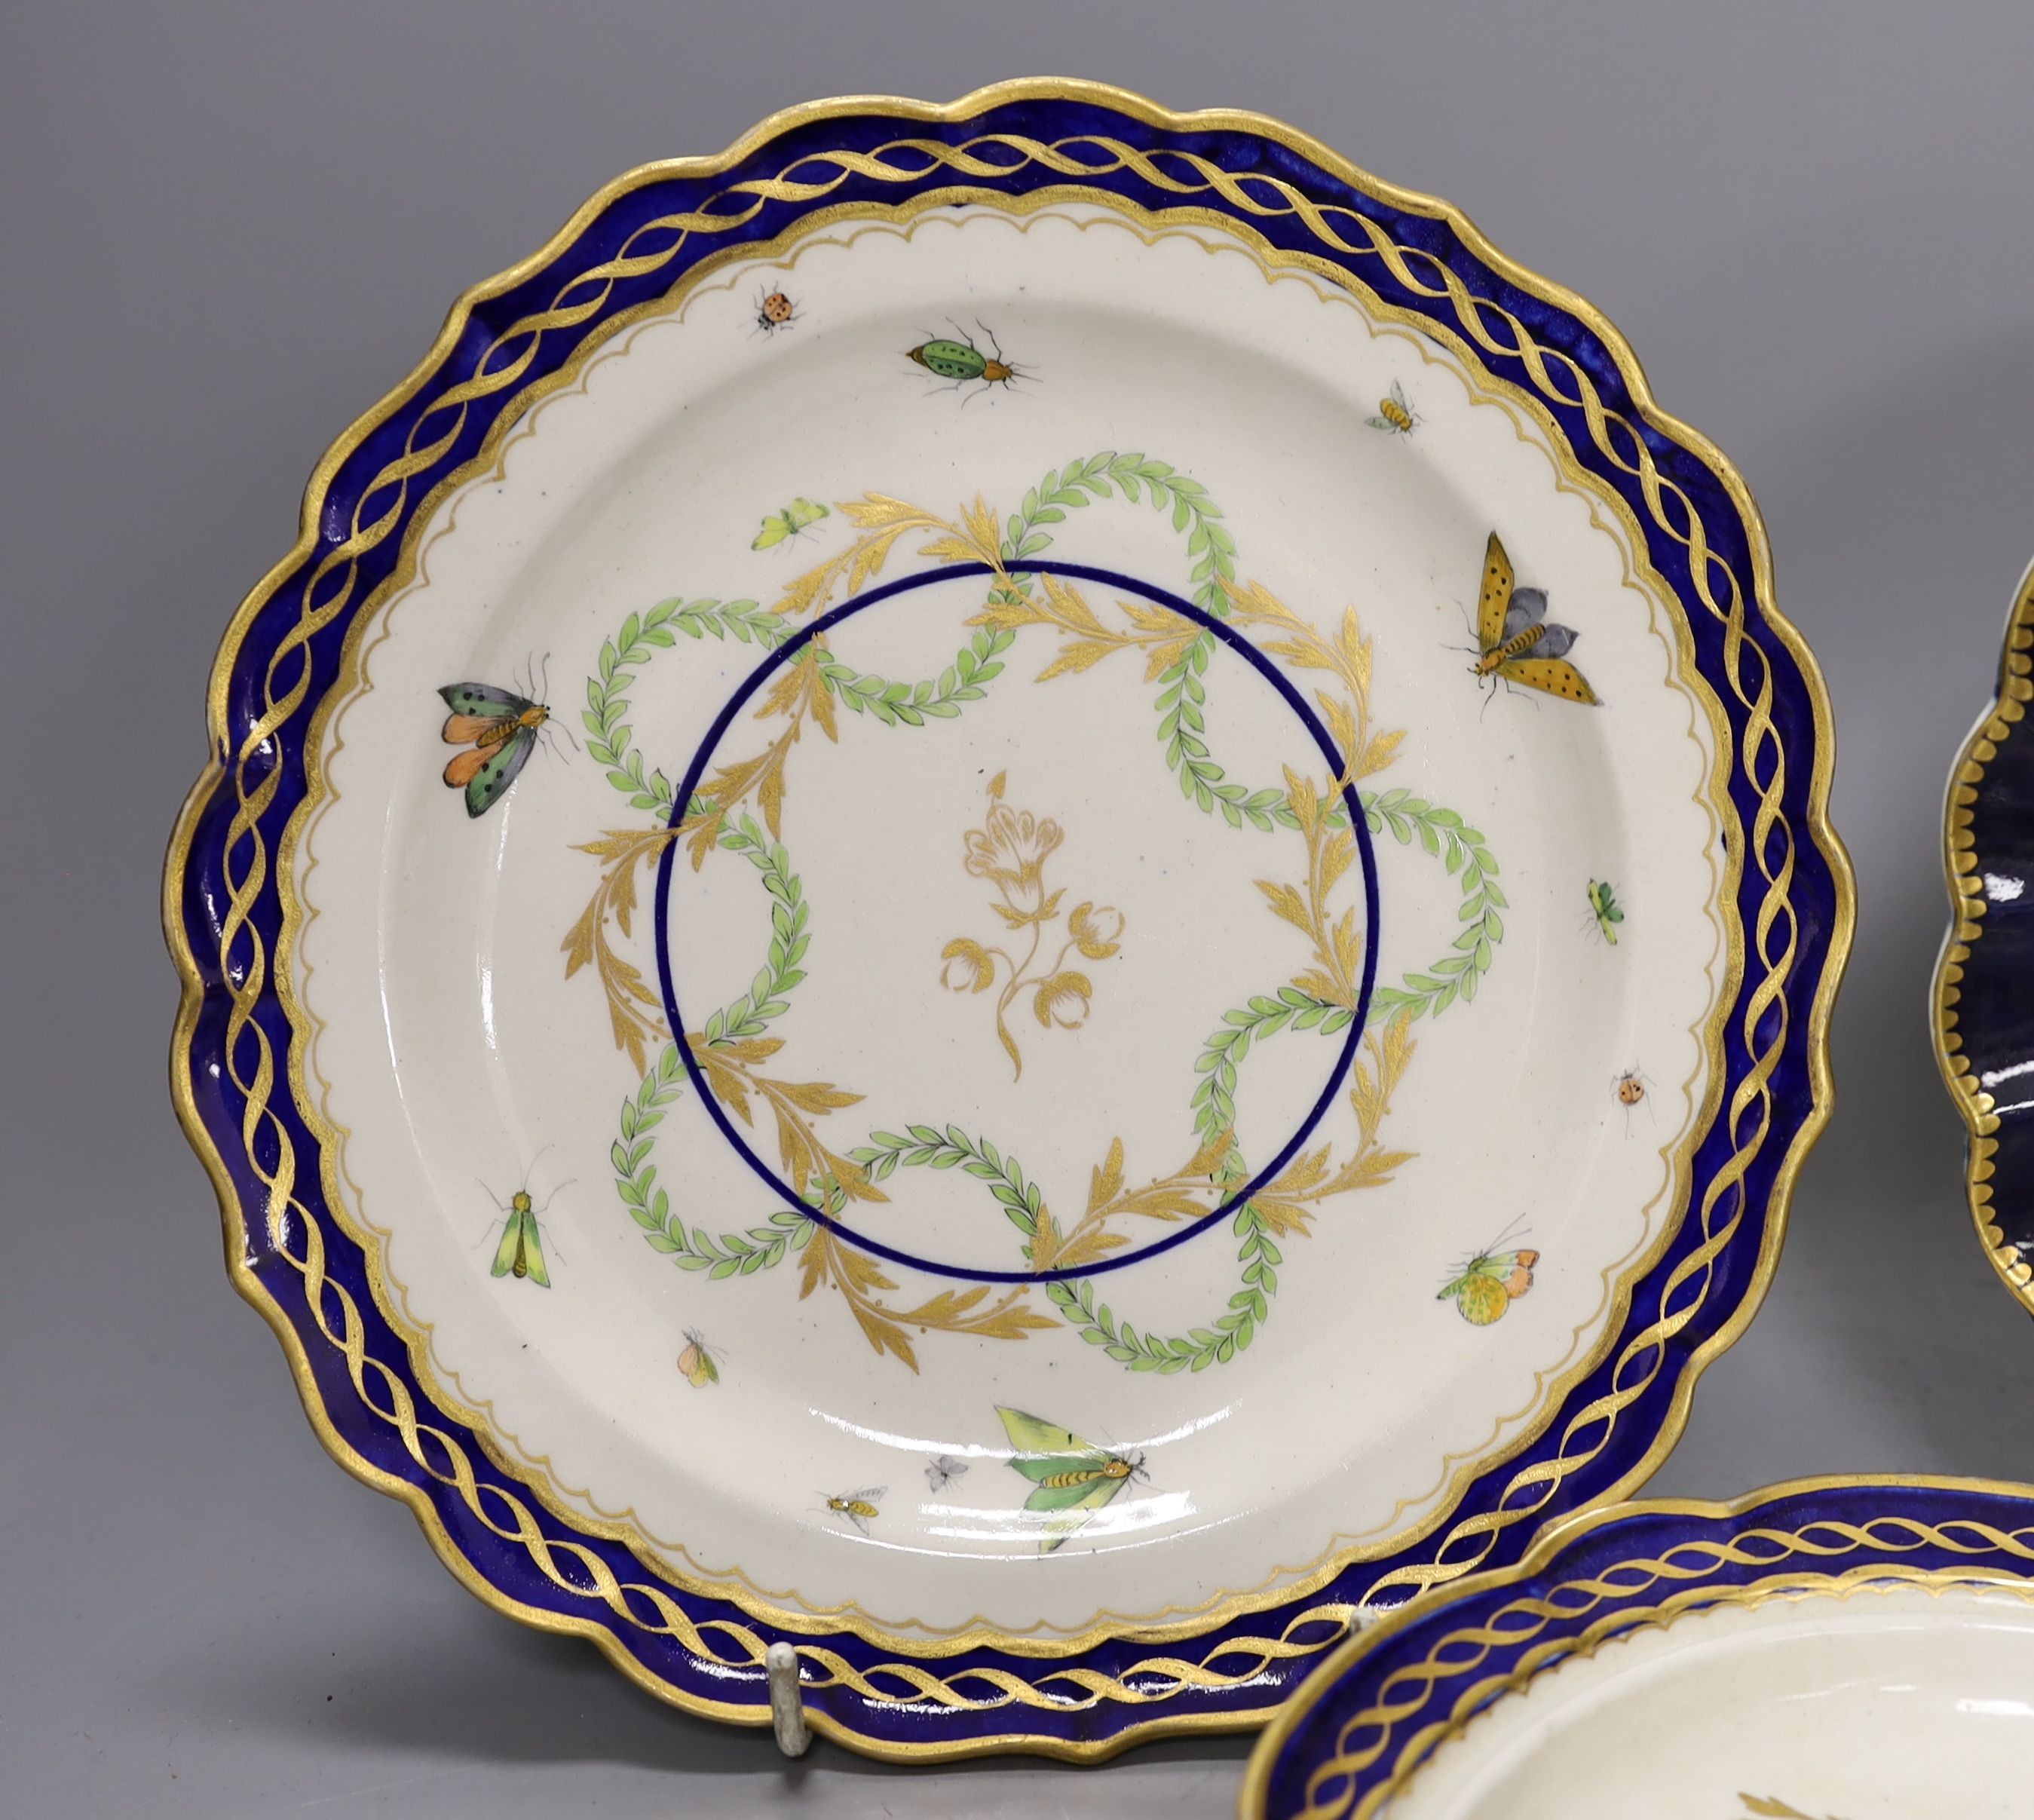 Three Worcester plates having blue border, one with elaborated gilding enclosing a bouquet of flowers, two plates both with a star shaped foliate design in the centre, c.1775, largest 21.5 cm